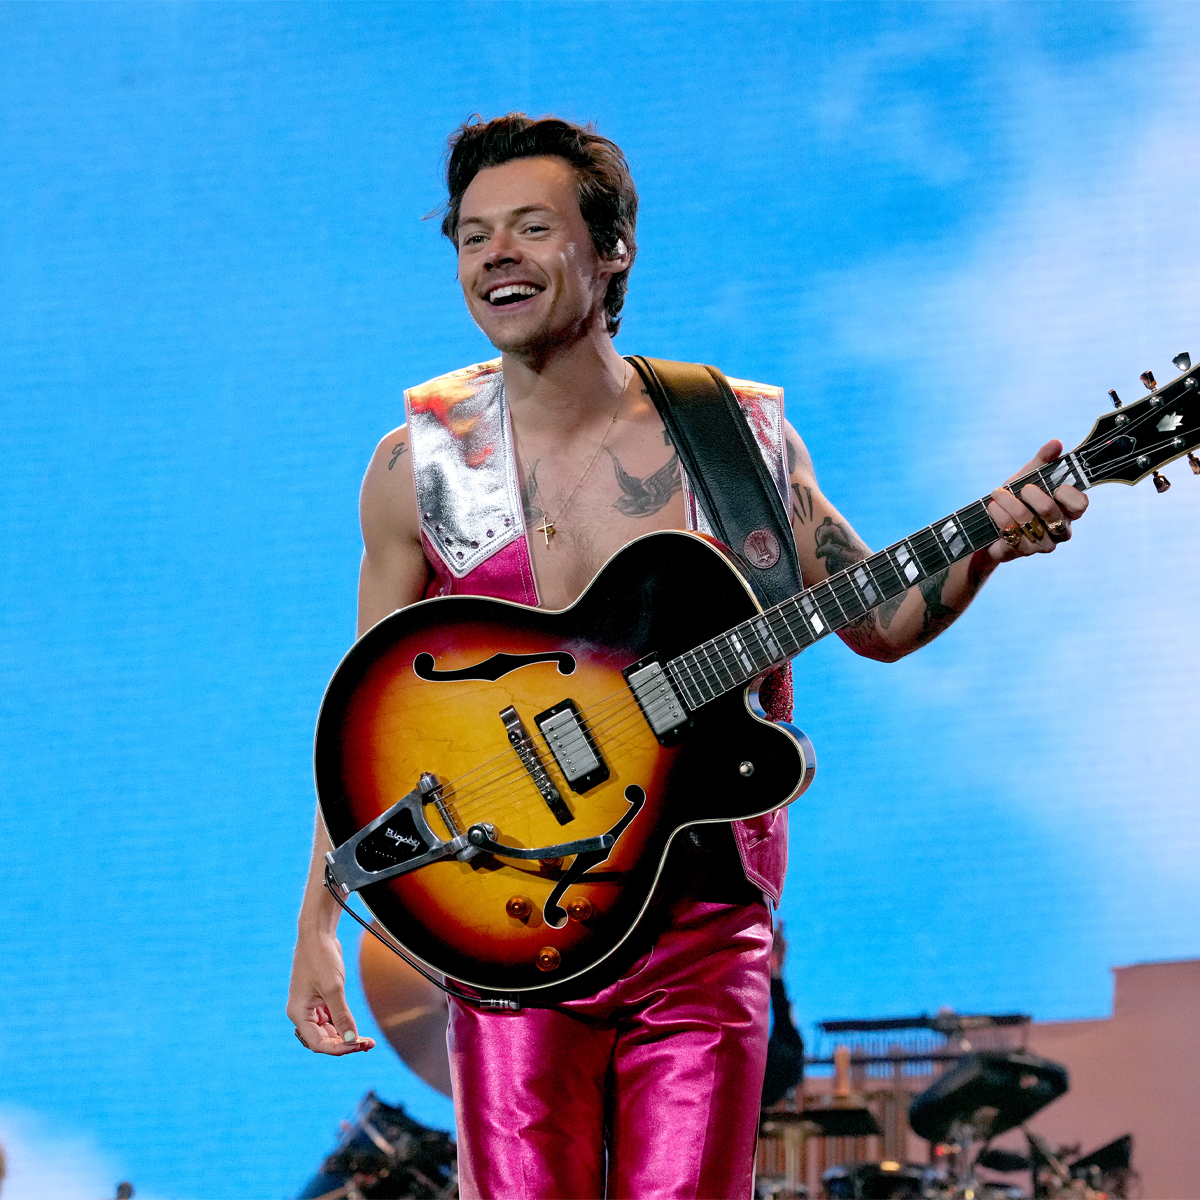 Harry Styles' Golden Moments From His Love On Tour Are Award-Worthy